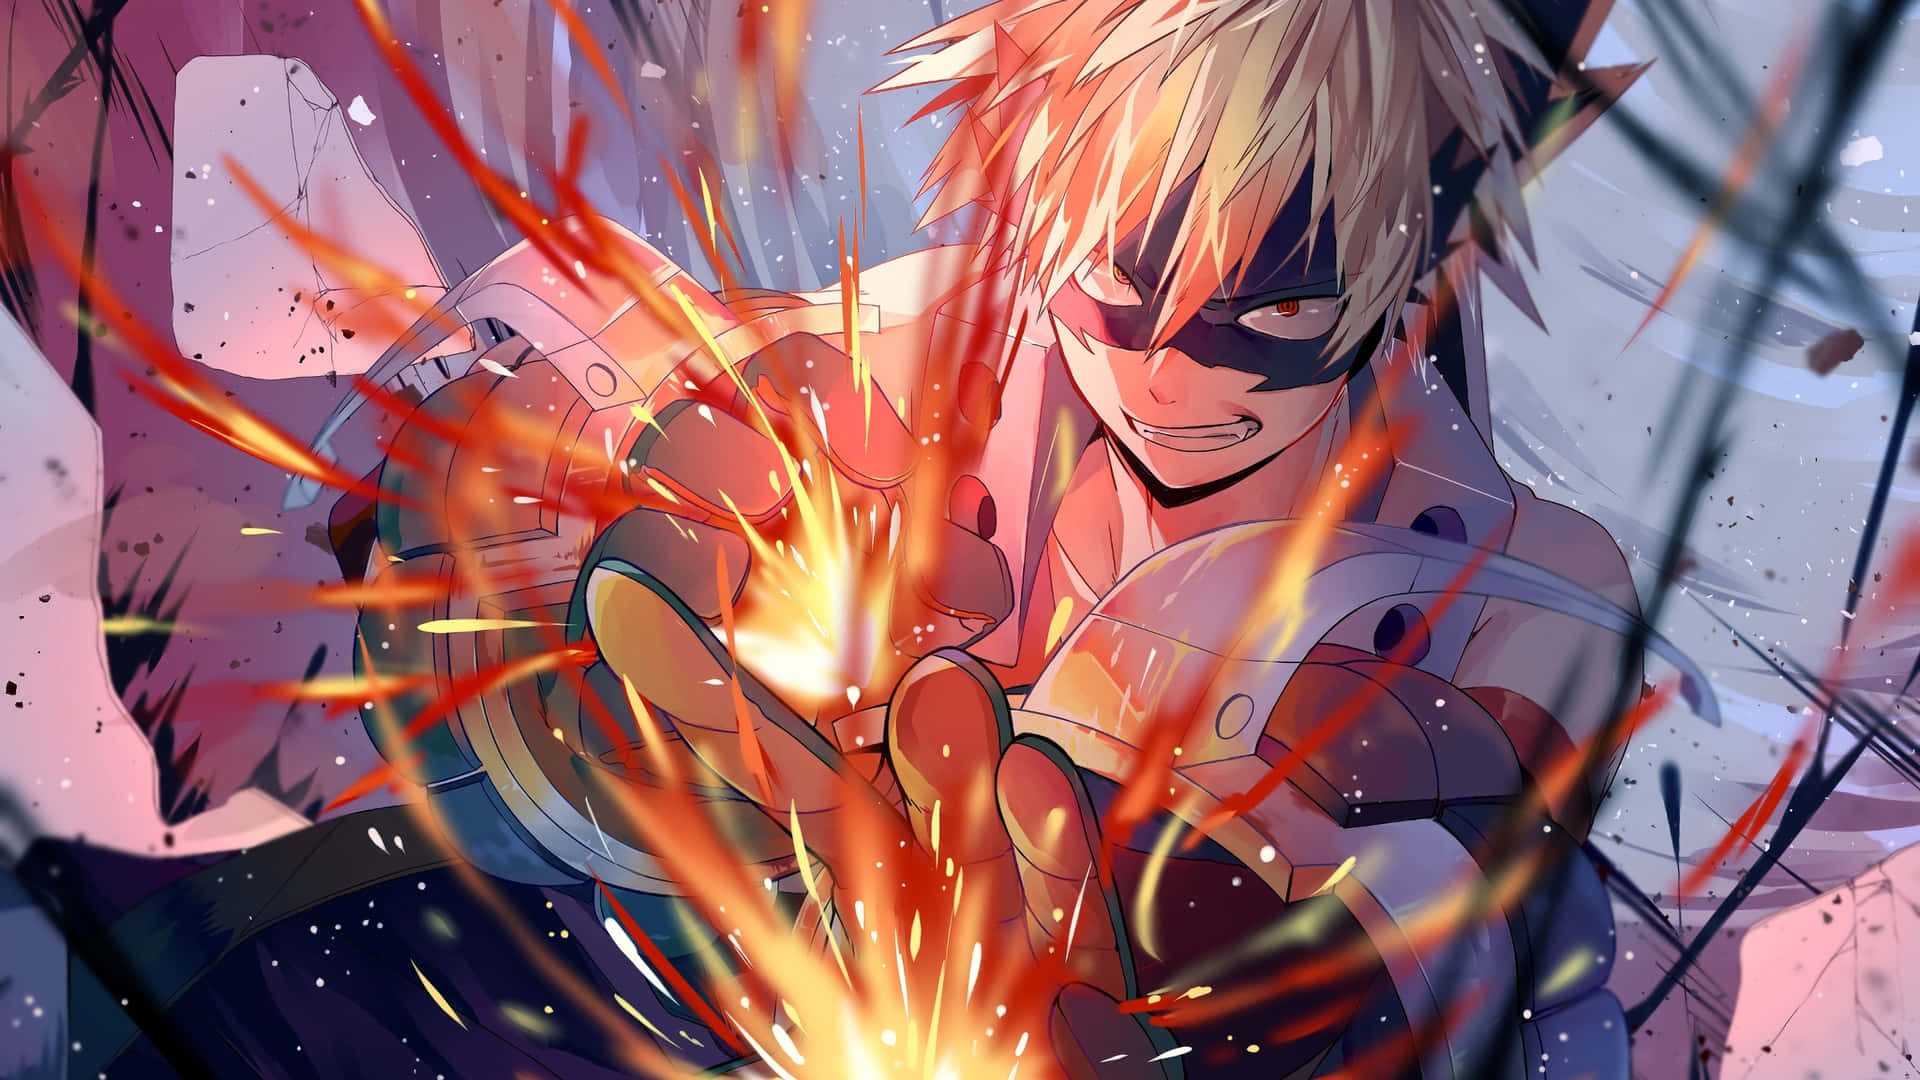 Bakugou Stands Determined Against A Fiery Background